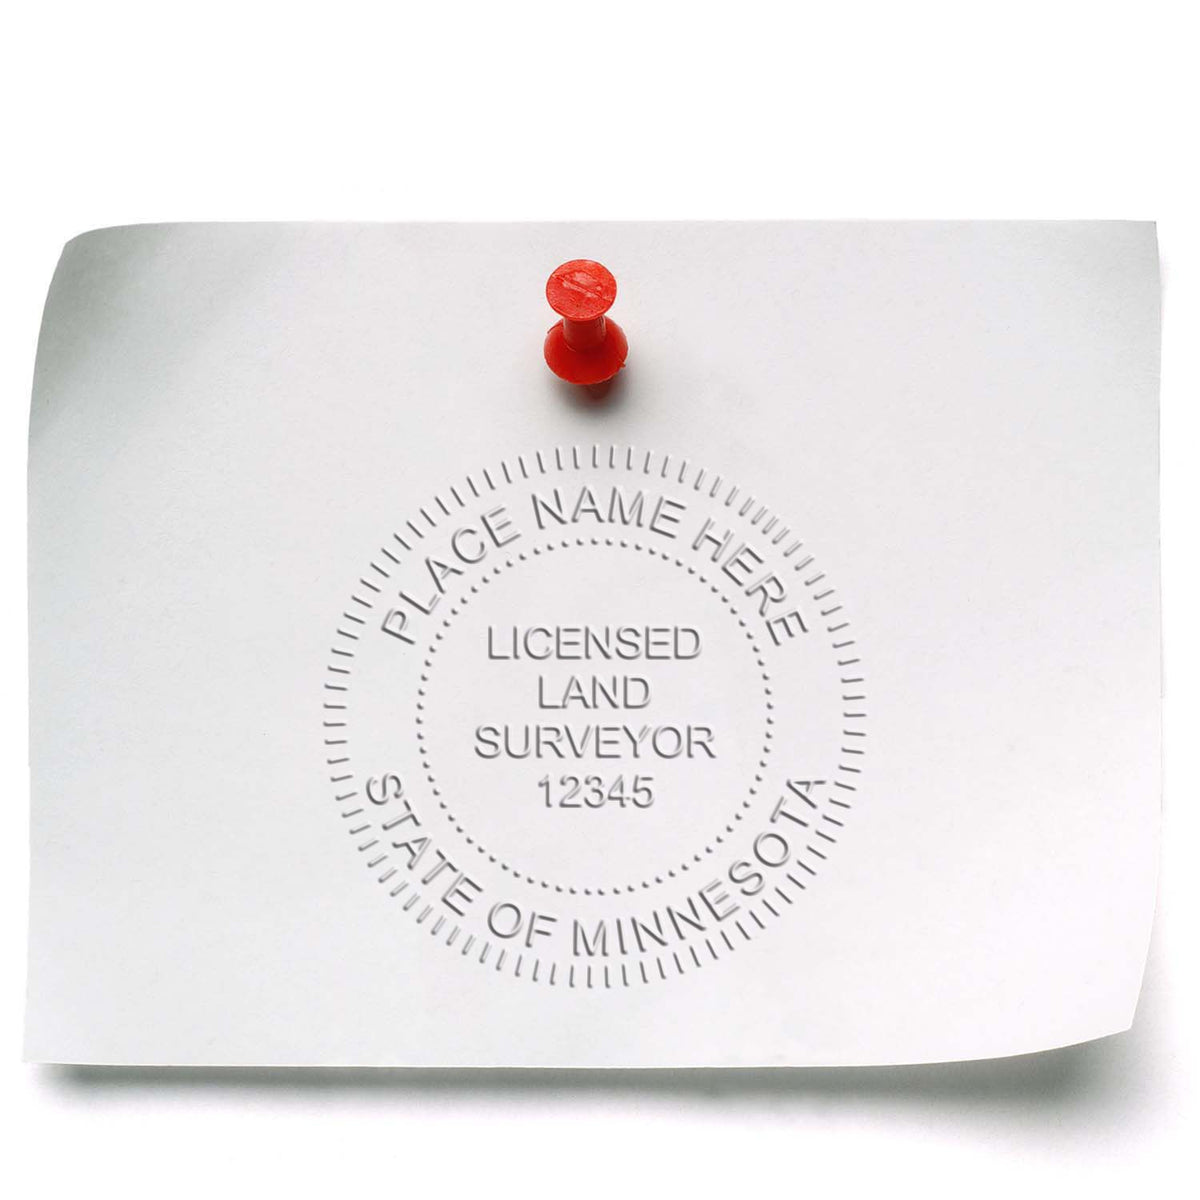 An alternative view of the Handheld Minnesota Land Surveyor Seal stamped on a sheet of paper showing the image in use